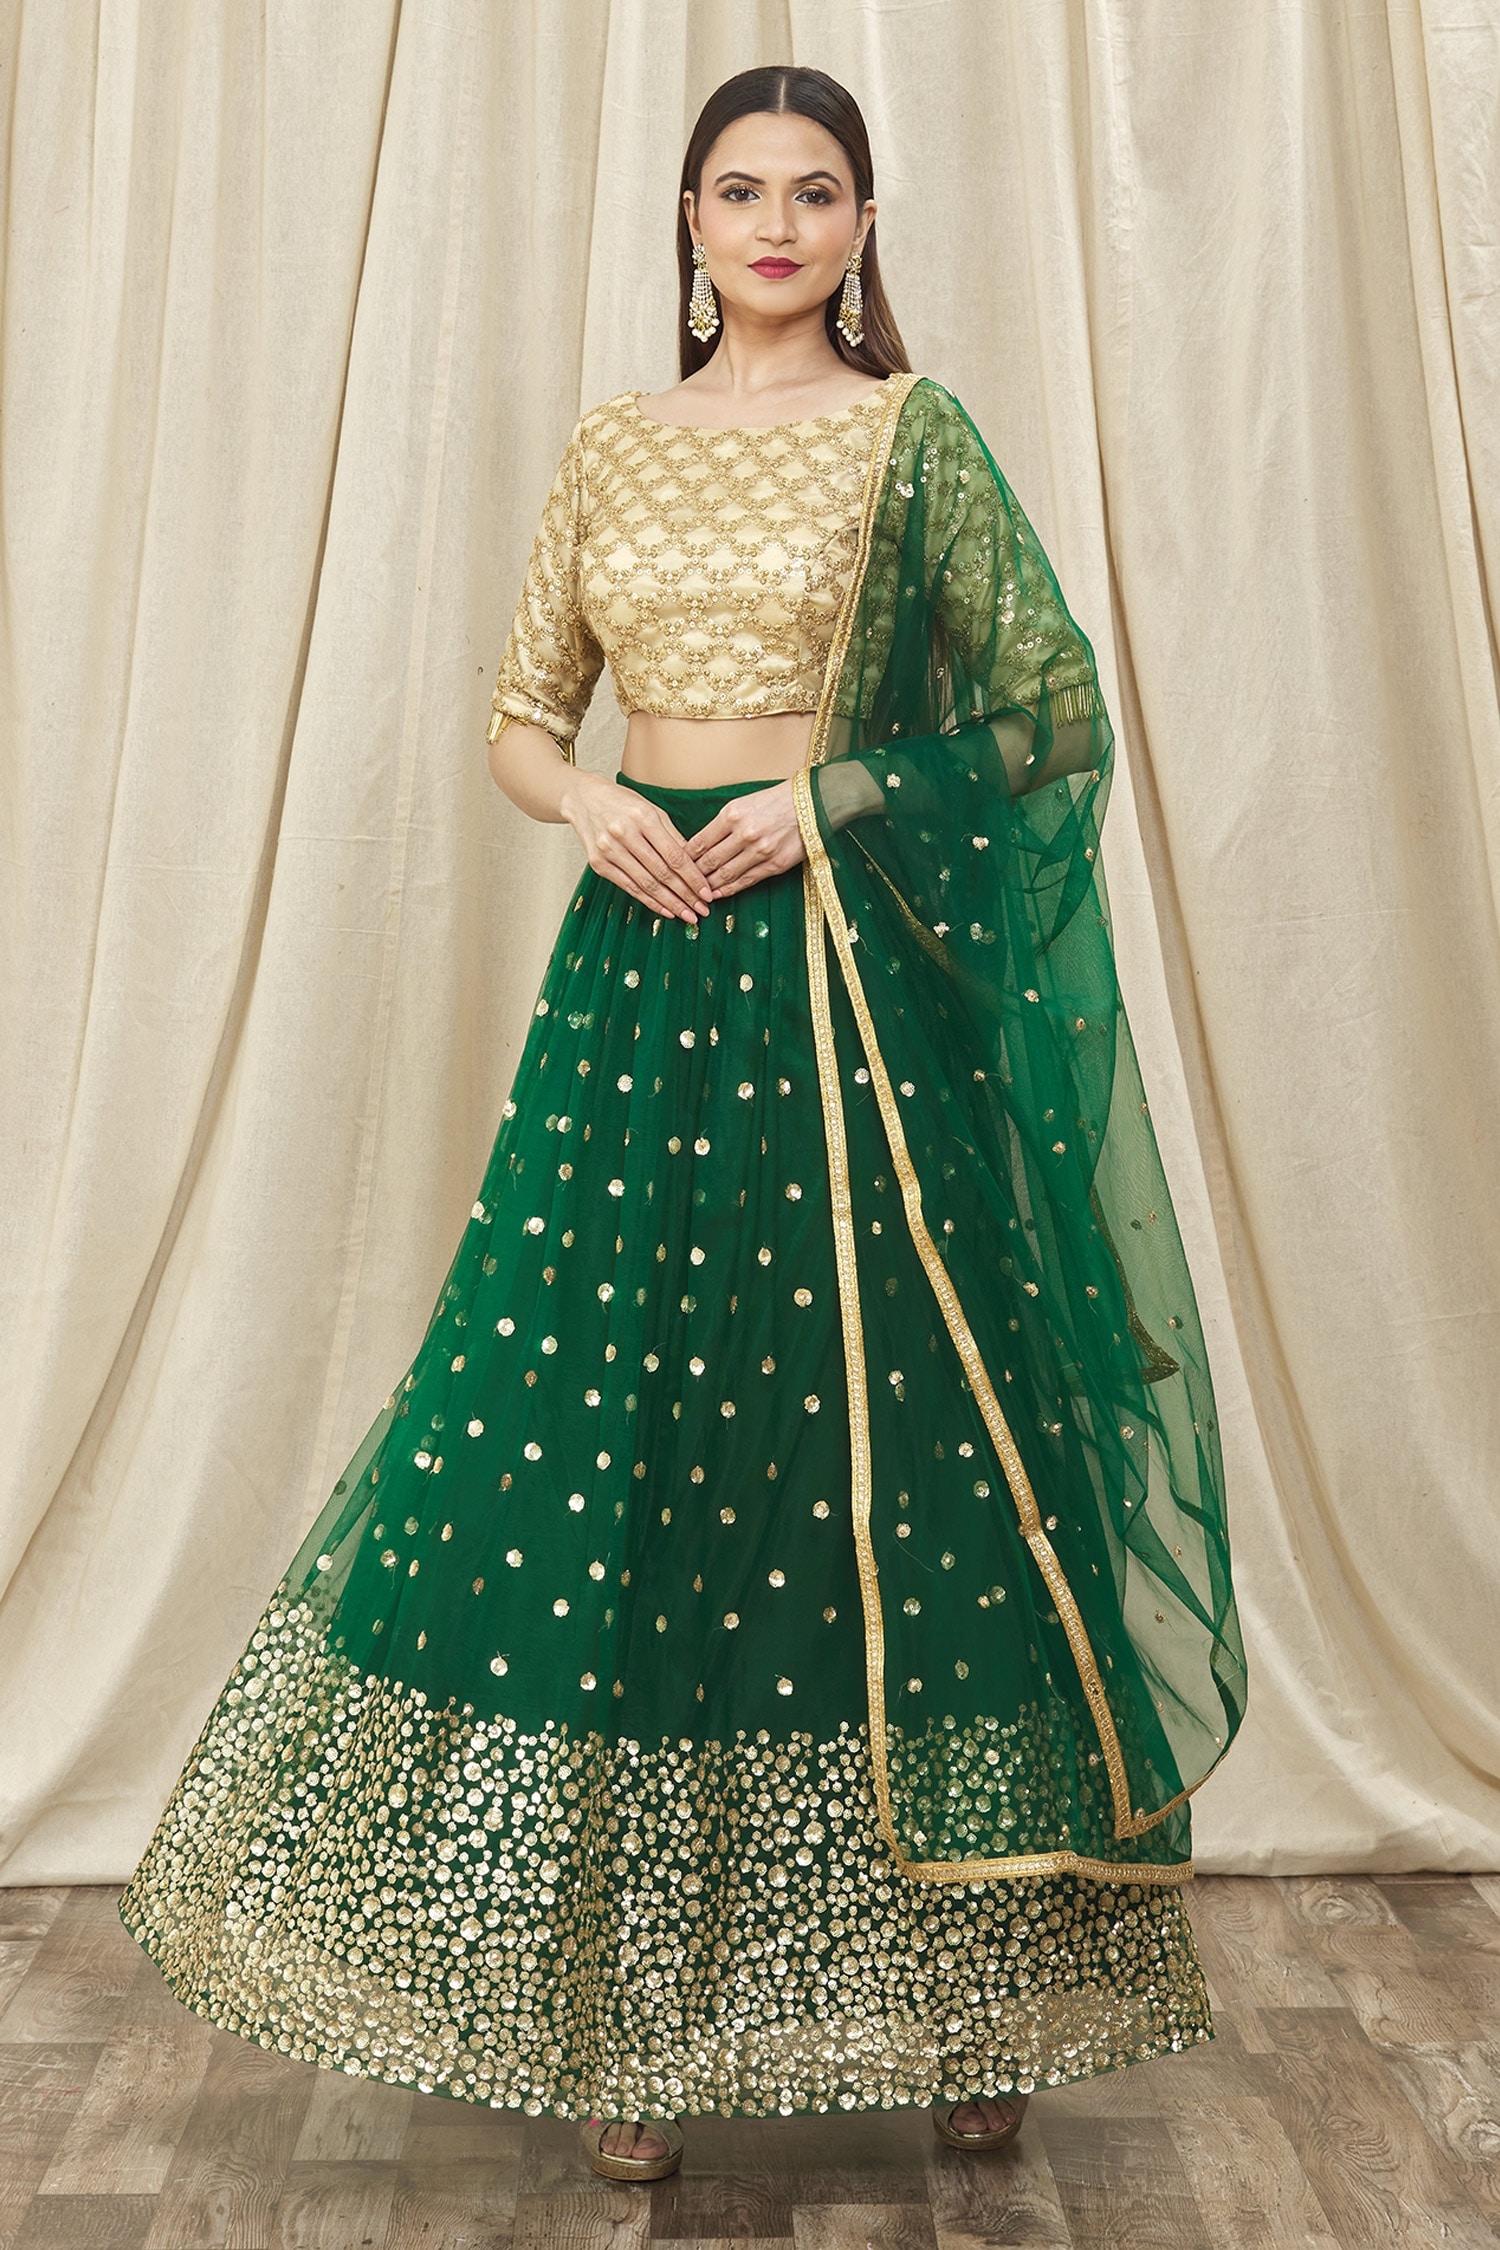 Buy Green Lehenga And Blouse: Art Silk Embroidered Sequin Round Butti ...